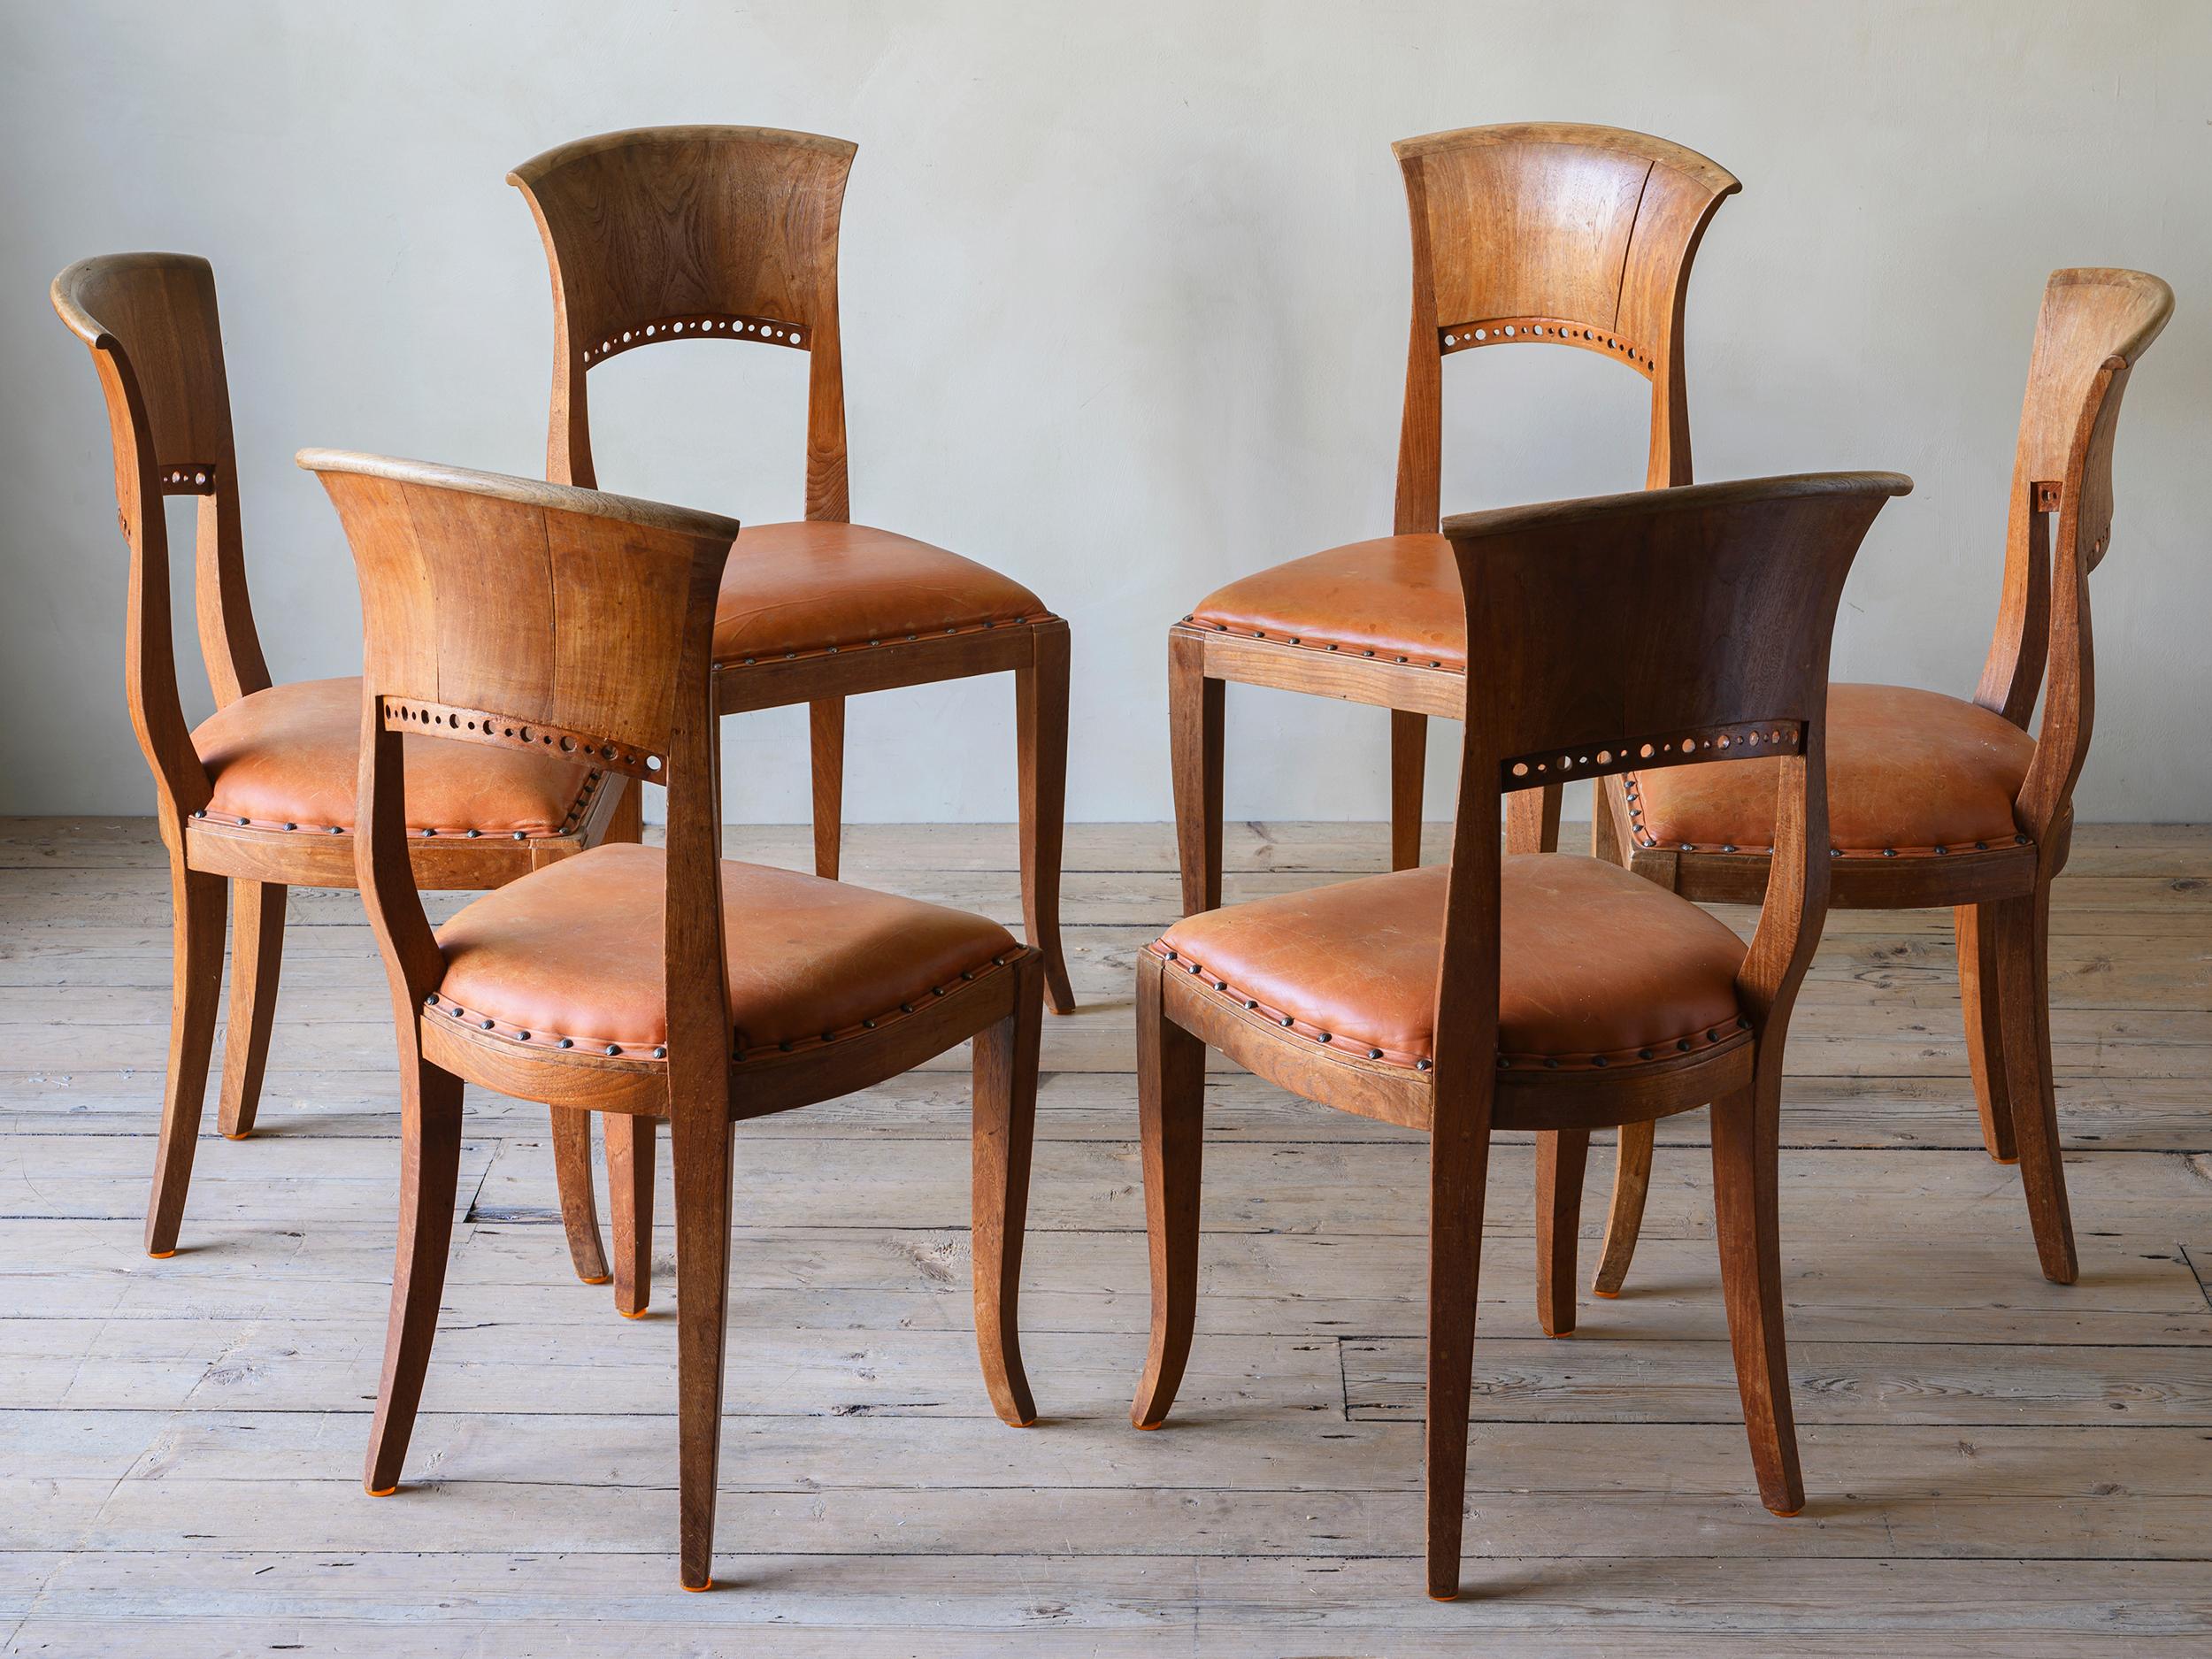 Fine and sculptural set of six Art Nouveau (Jugend) dining chairs upholstered in brown leather. Ca 1920's Sweden.